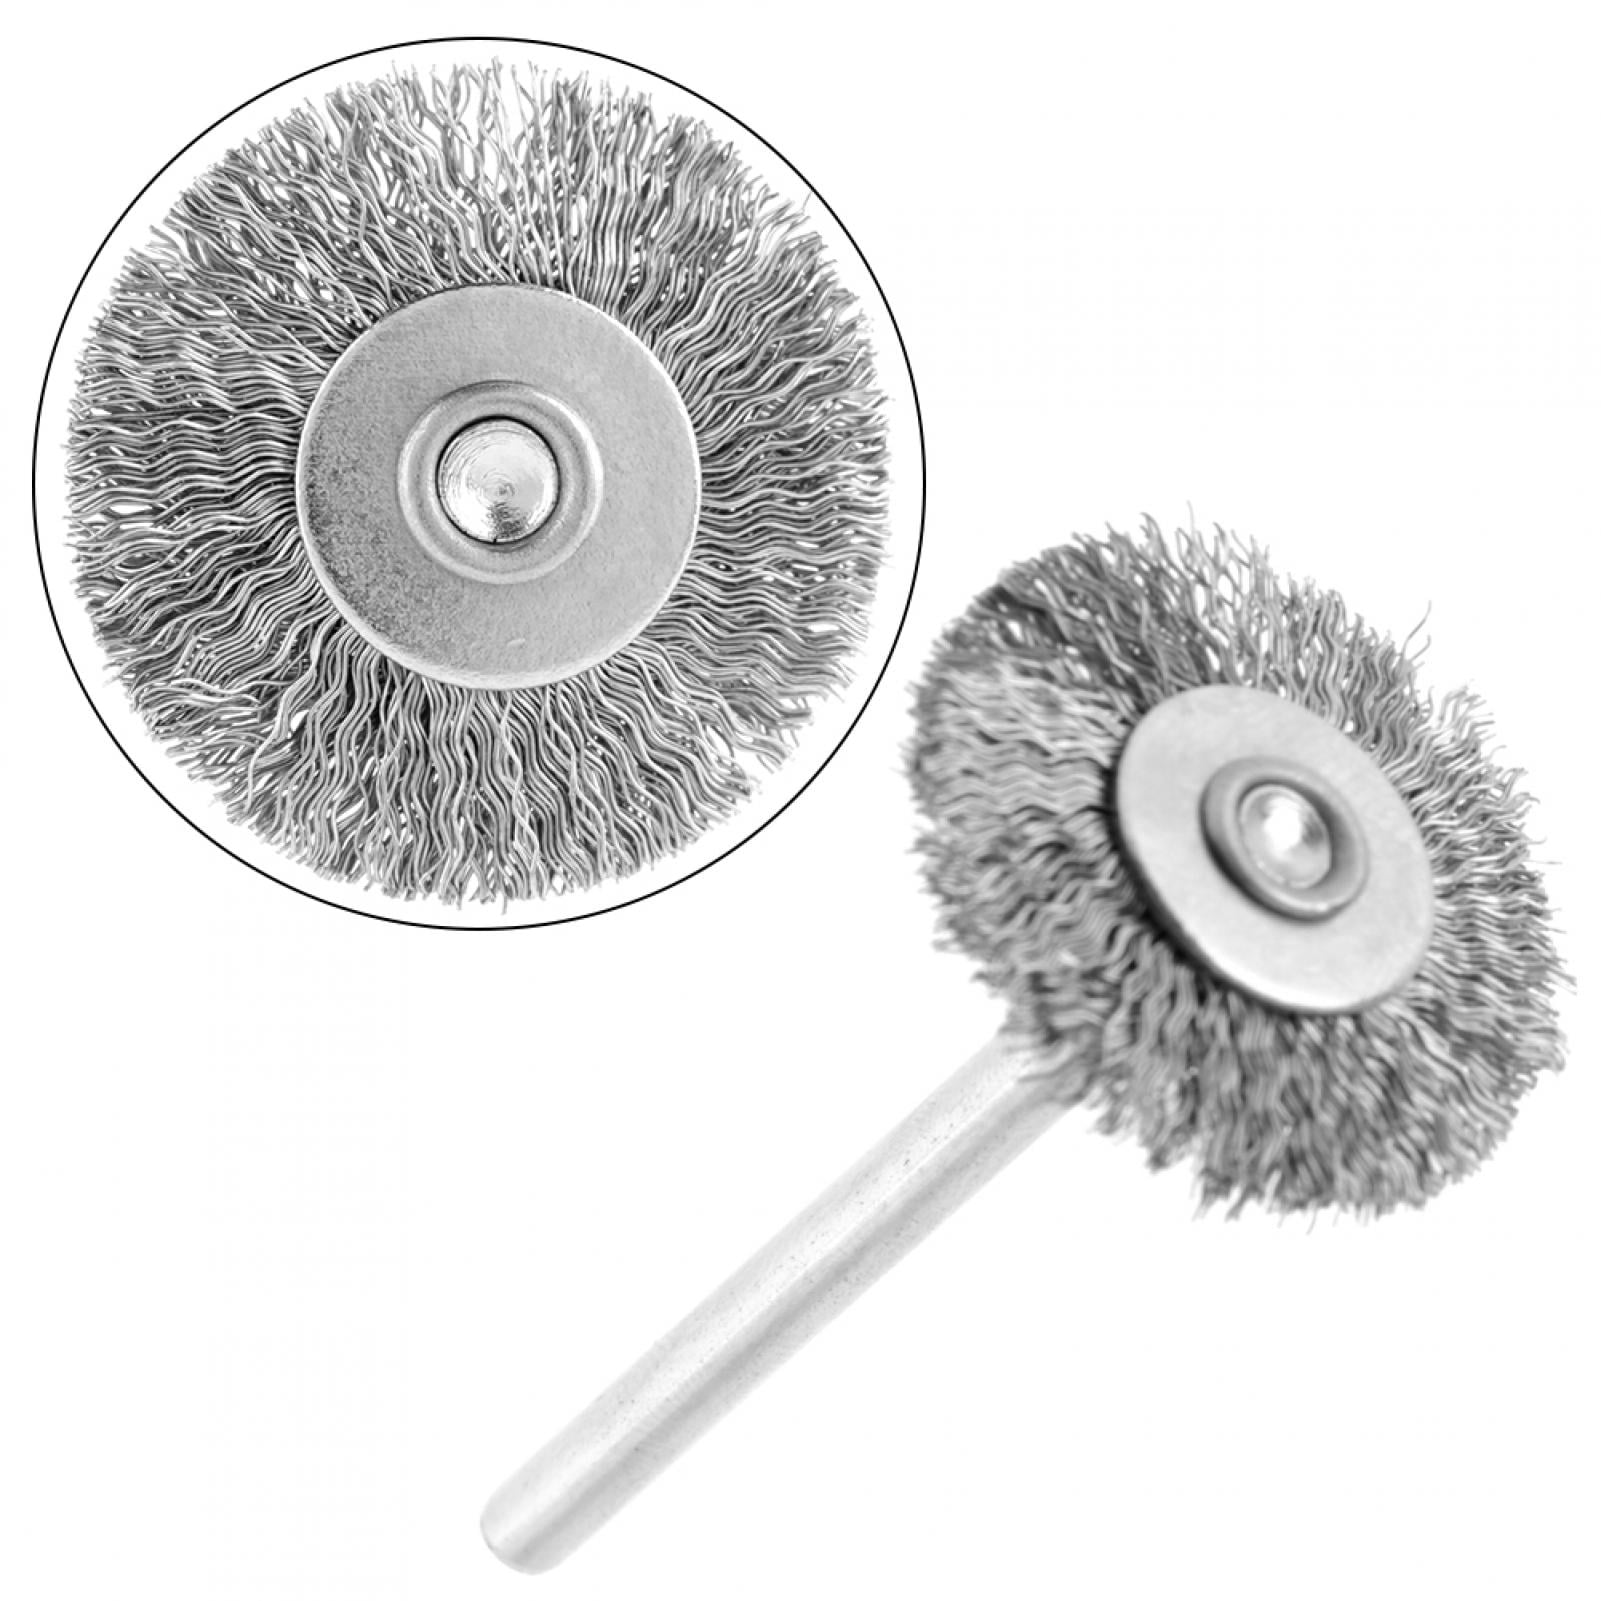 45pcs Stainless Steel Wire Cup Mix Brush For Rotary Tools Grinder Removal Wheel 